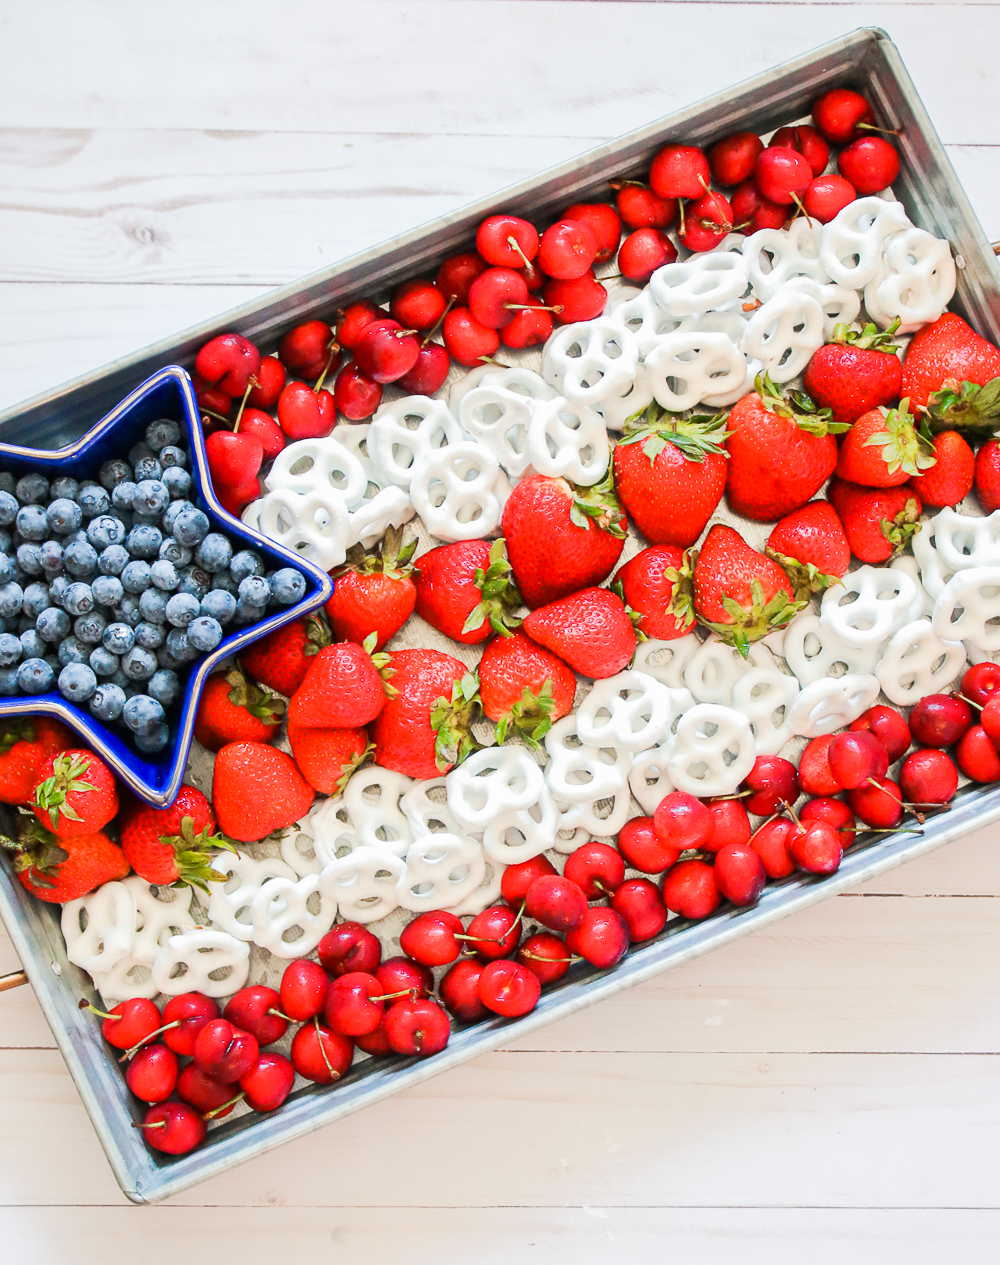 Blogger Stephanie Ziajka shares a healthy American flag tray with fruit and yogurt-covered pretzels on Diary of a Debutante